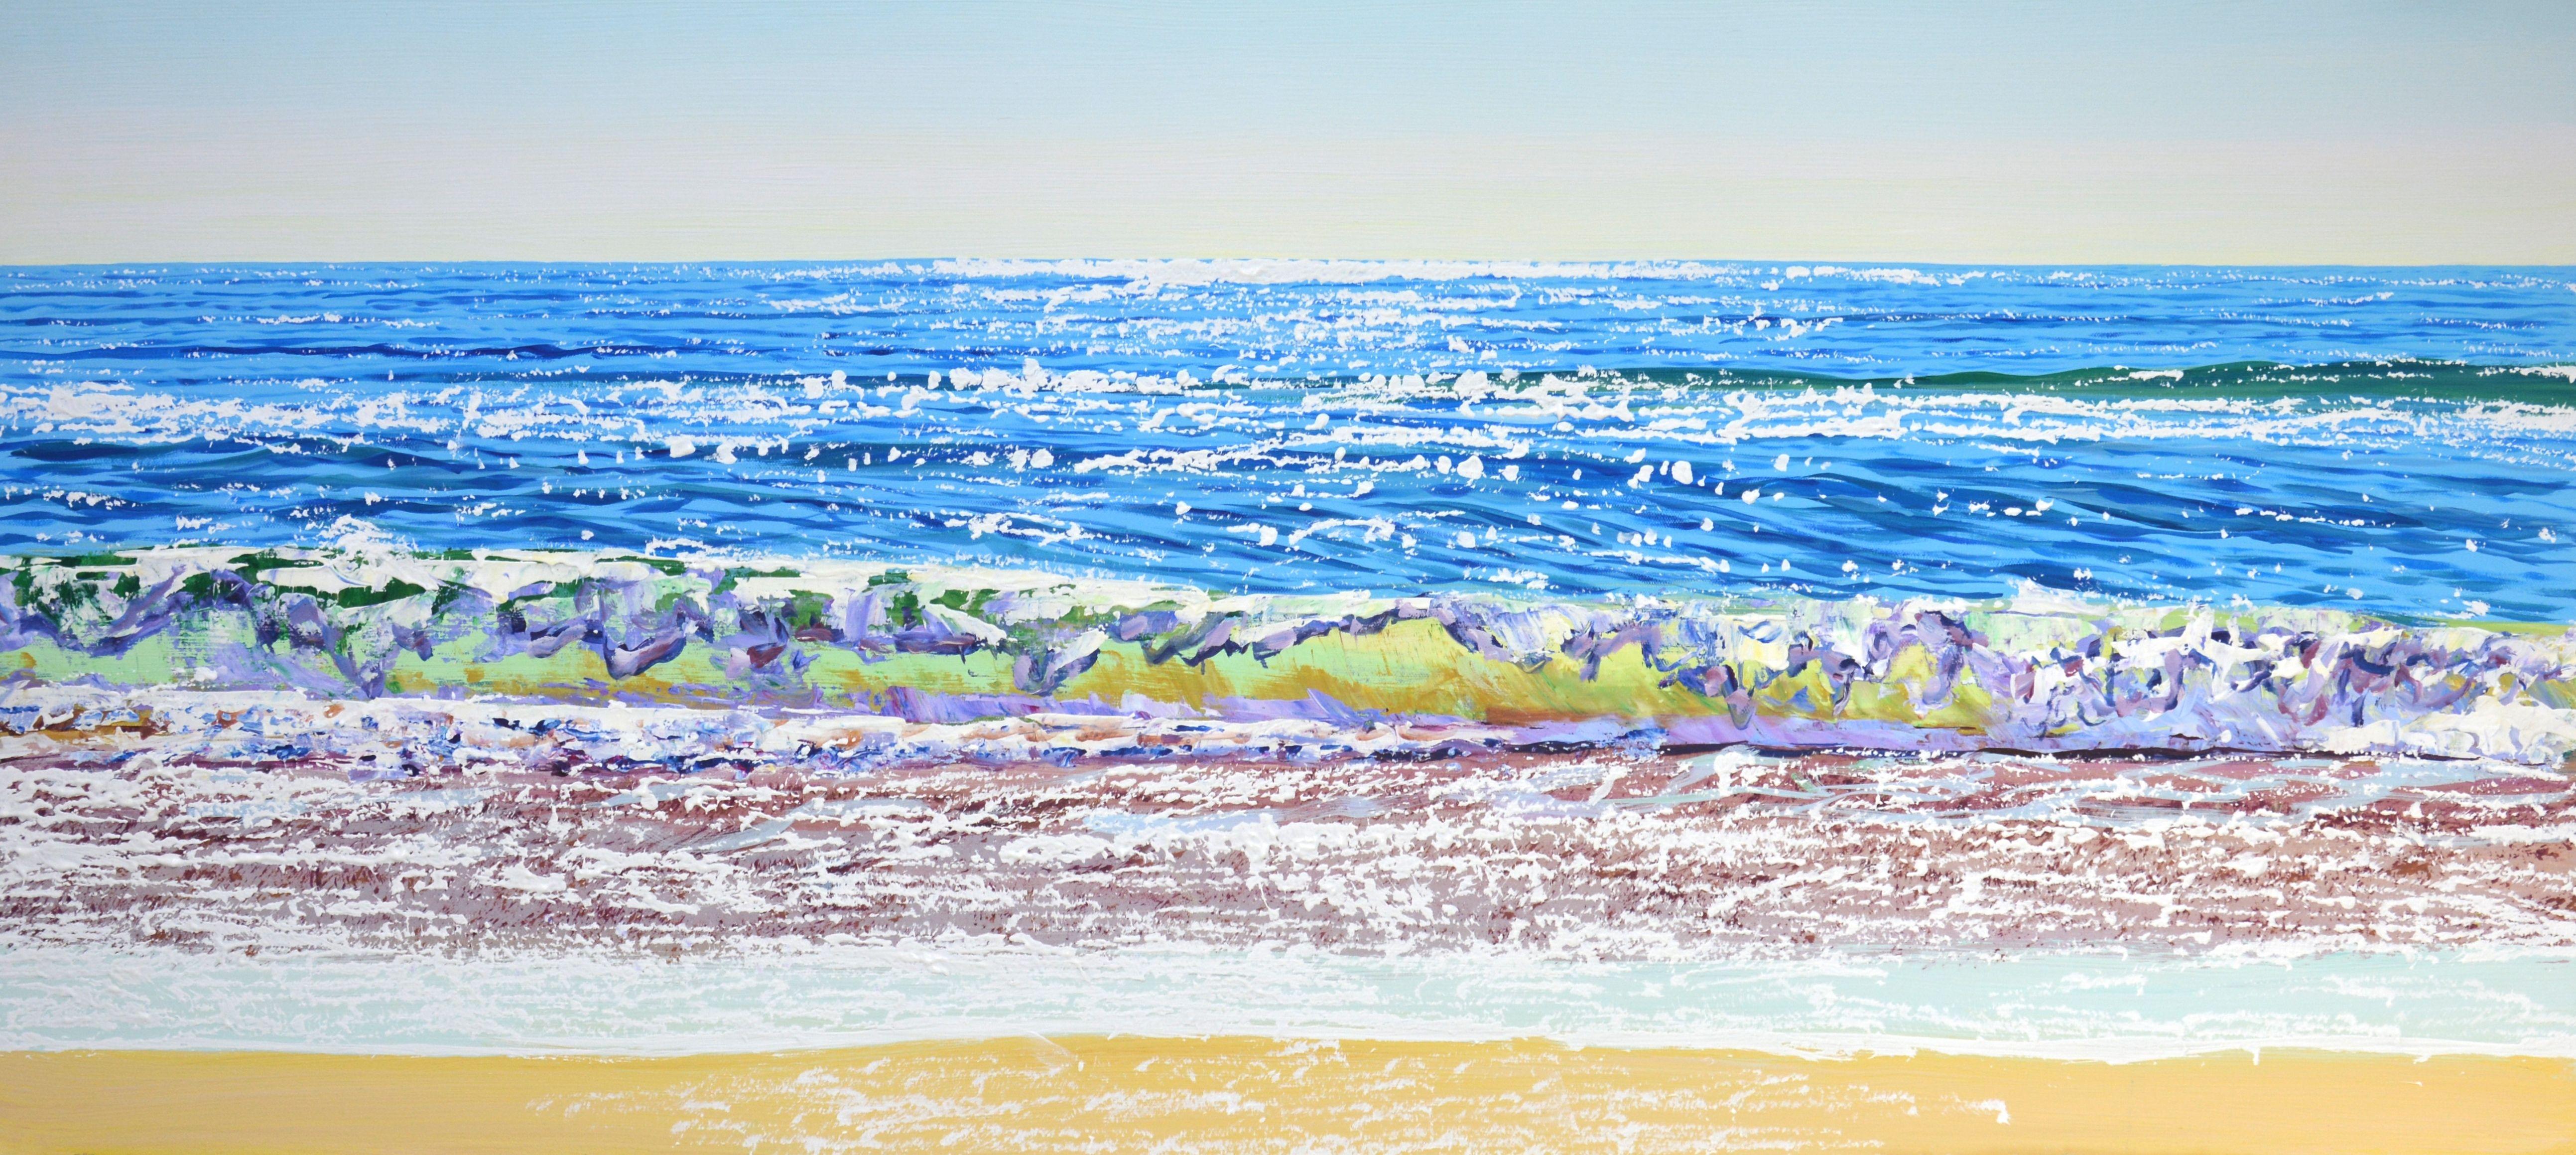 Sea. Glare. Beach.  Summer seascape: blue water, ocean, small waves, sun glare on the water, clear sky, sand, beach create an atmosphere of relaxation and romance. The blue and white palette, executed in the style of realism, emphasizes the energy